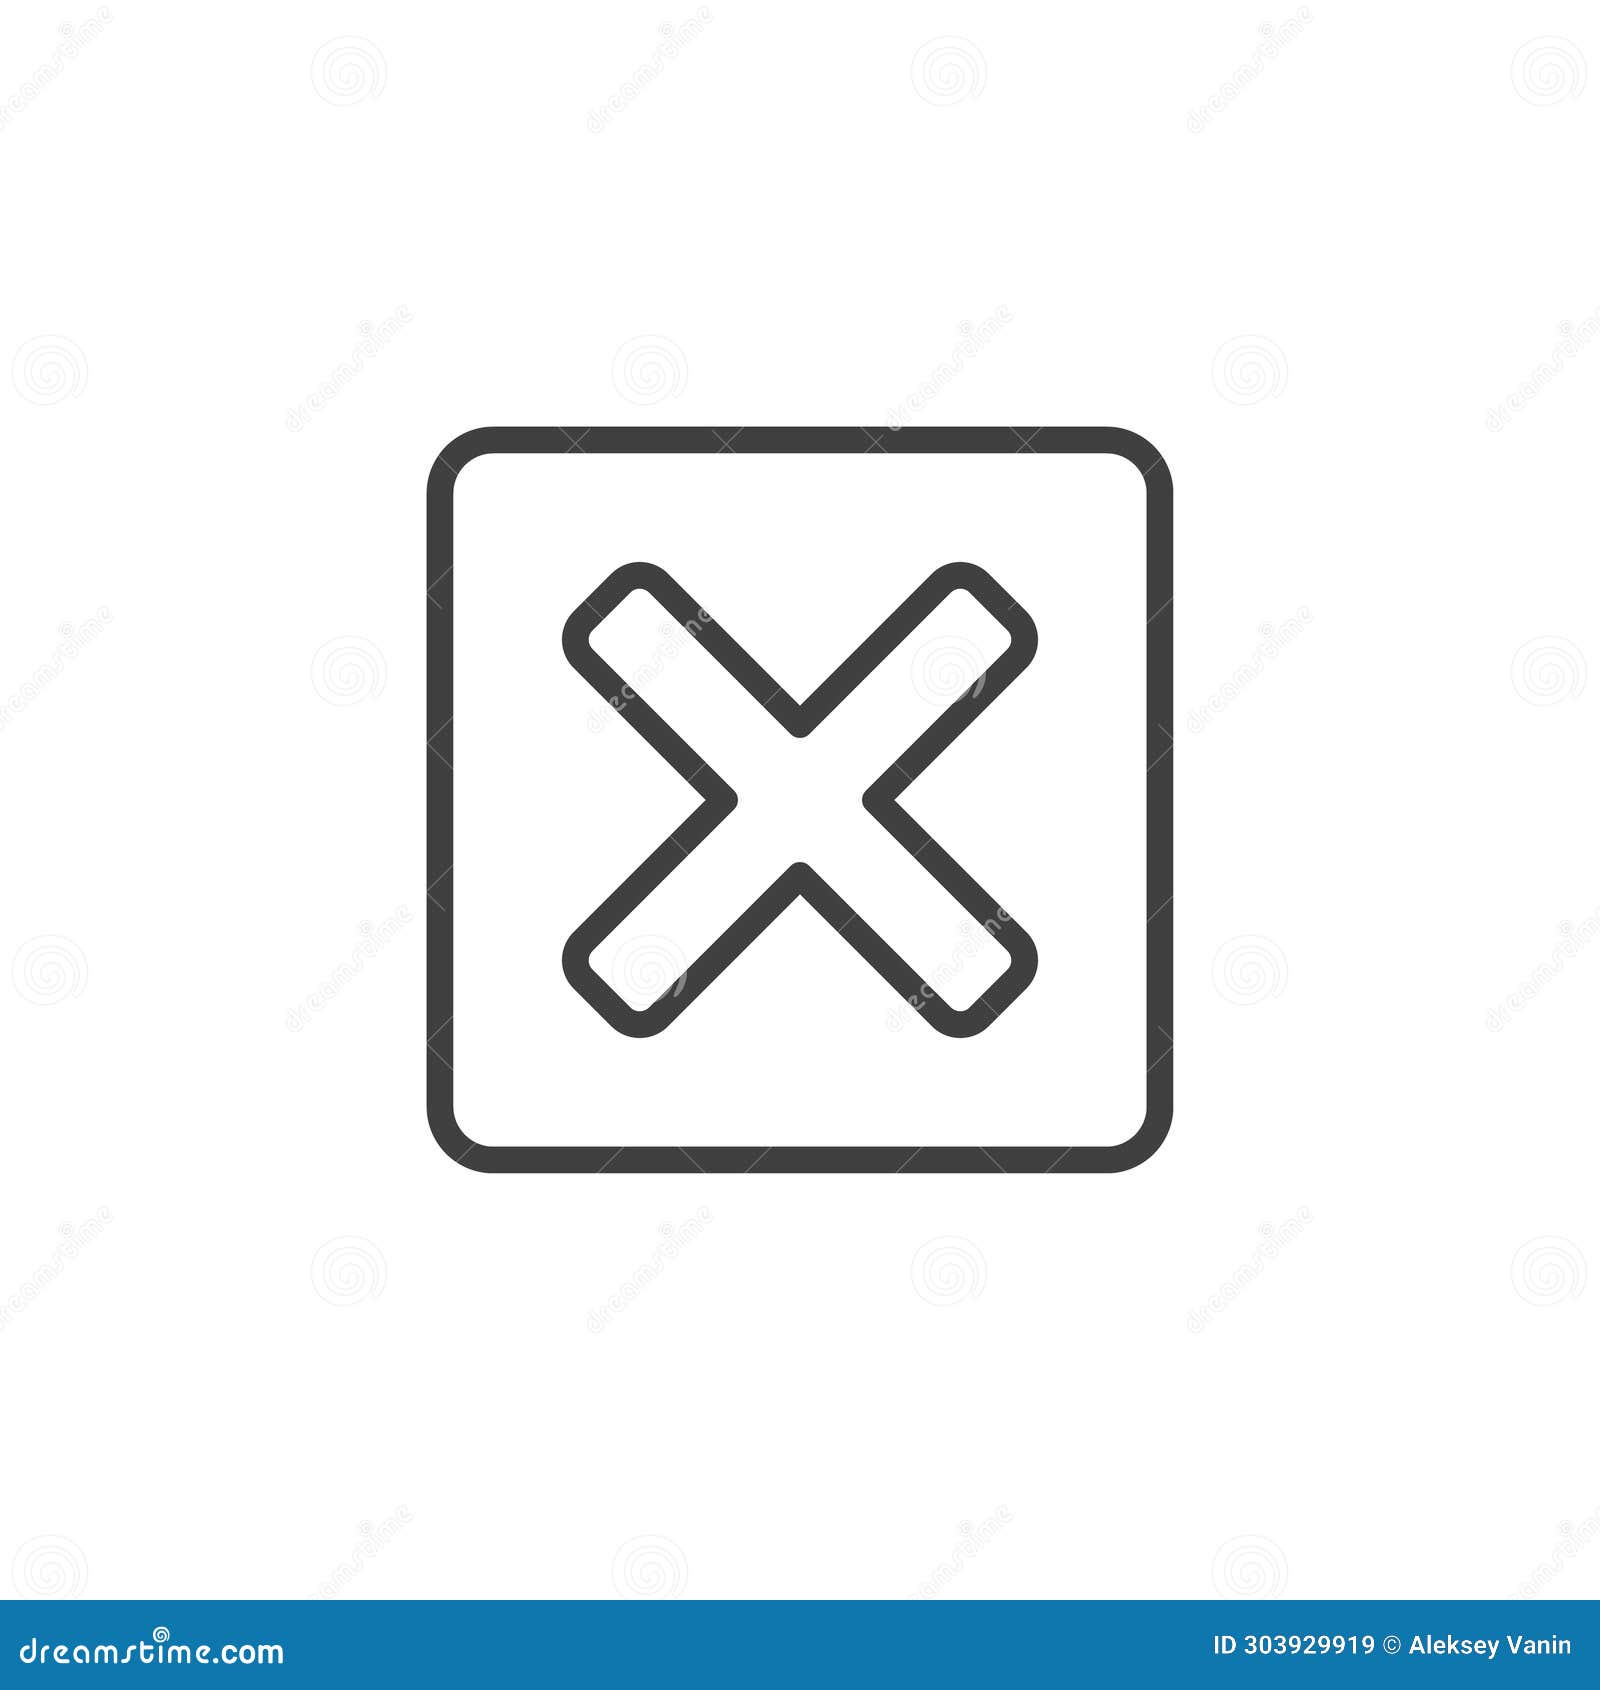 Close Button line icon stock vector. Illustration of linear